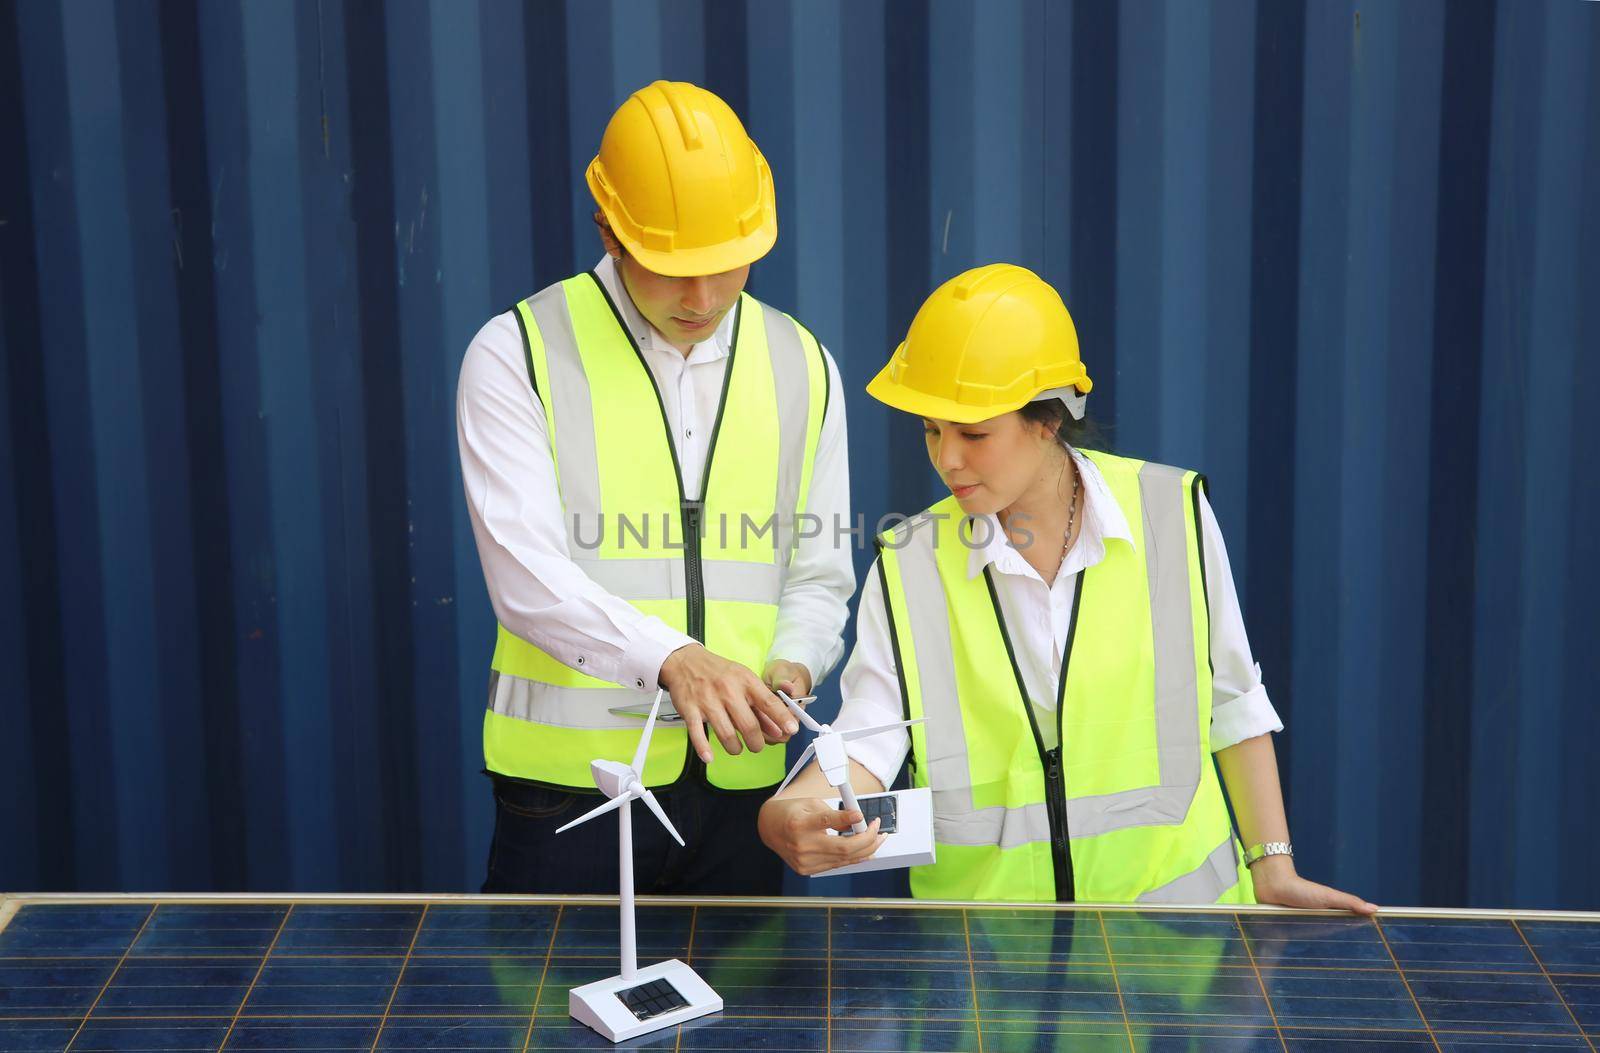 technicians install panels Solar cells to produce and distribute electricity. Energy technology concept